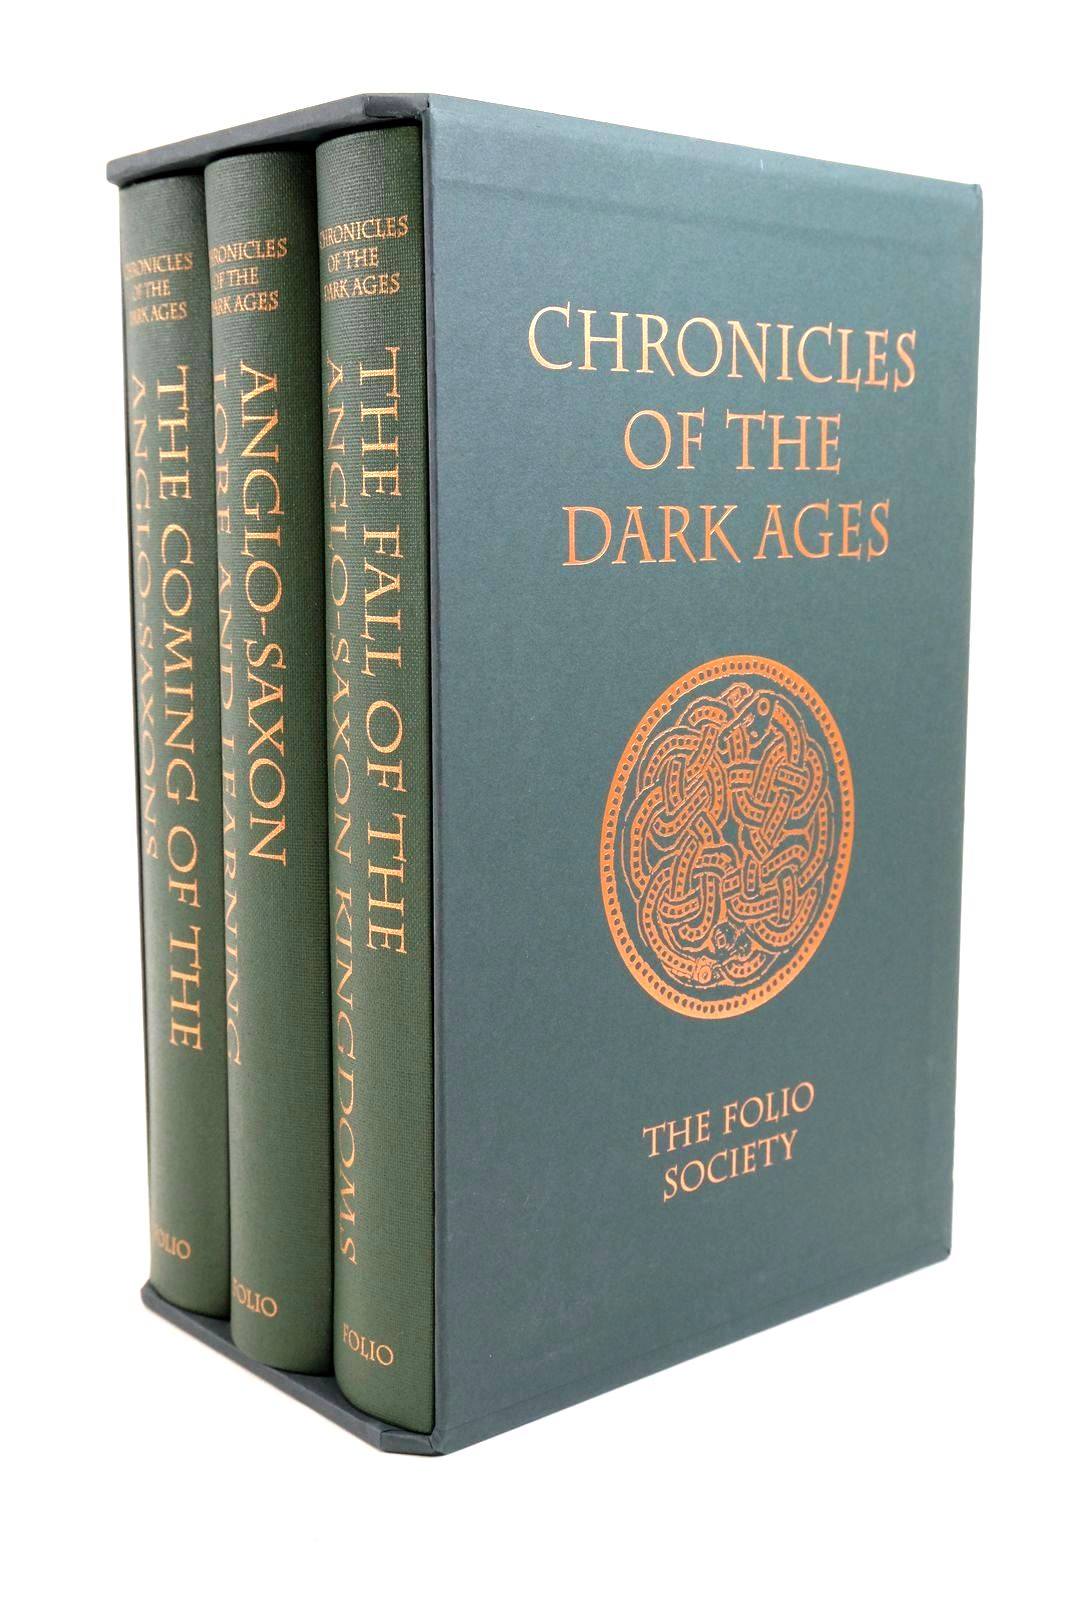 Photo of CHRONICLES OF THE DARK AGES (3 VOLUMES) written by Barber, Richard published by Folio Society (STOCK CODE: 1321319)  for sale by Stella & Rose's Books